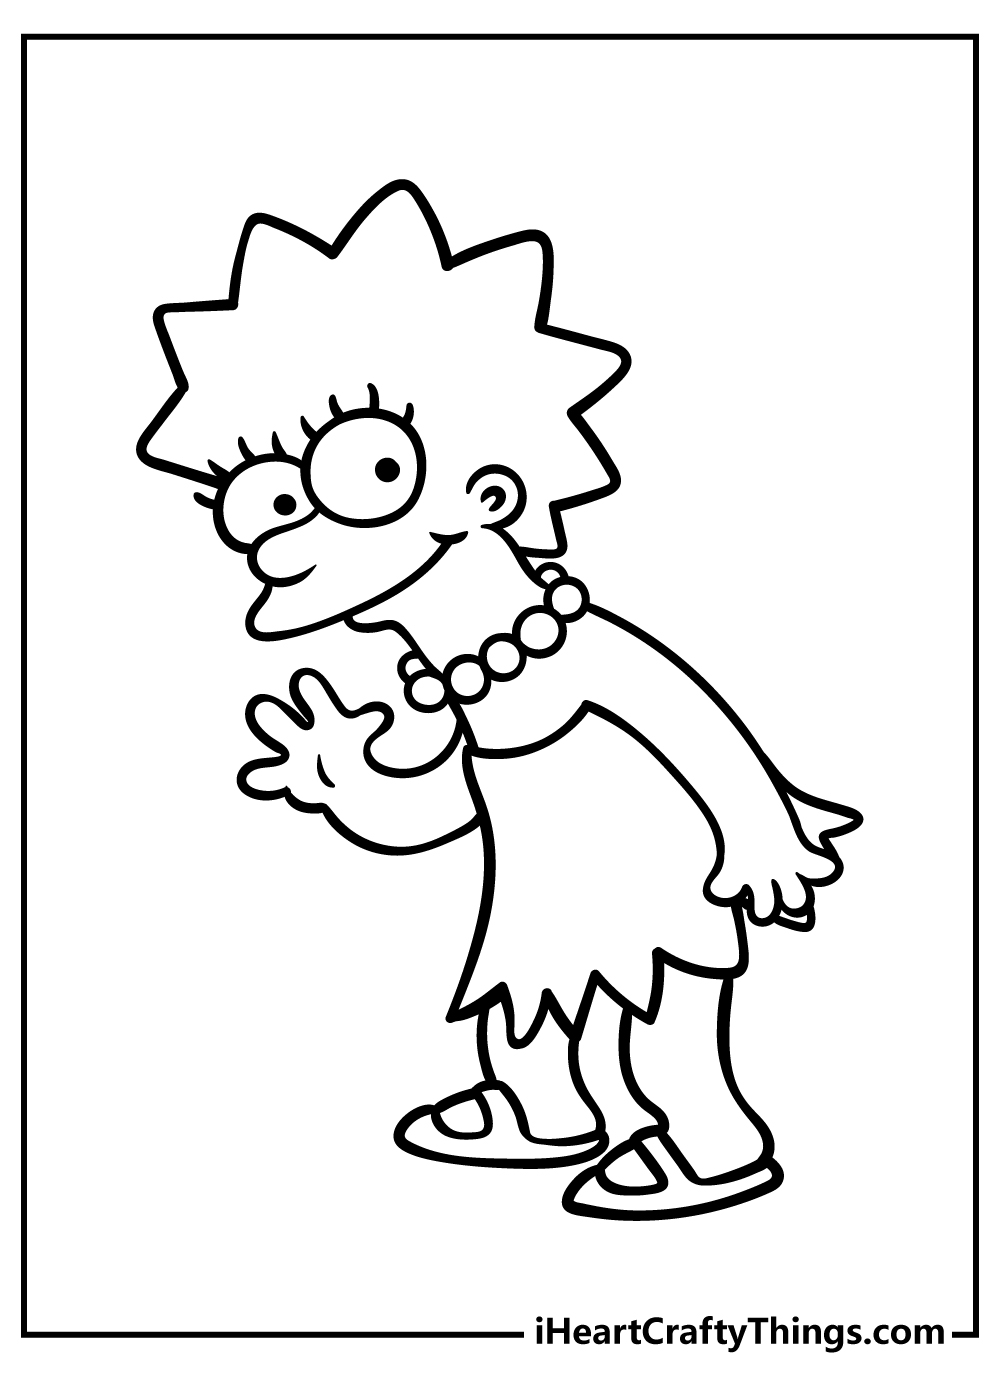 Simpsons Coloring Pages for preschoolers free printable